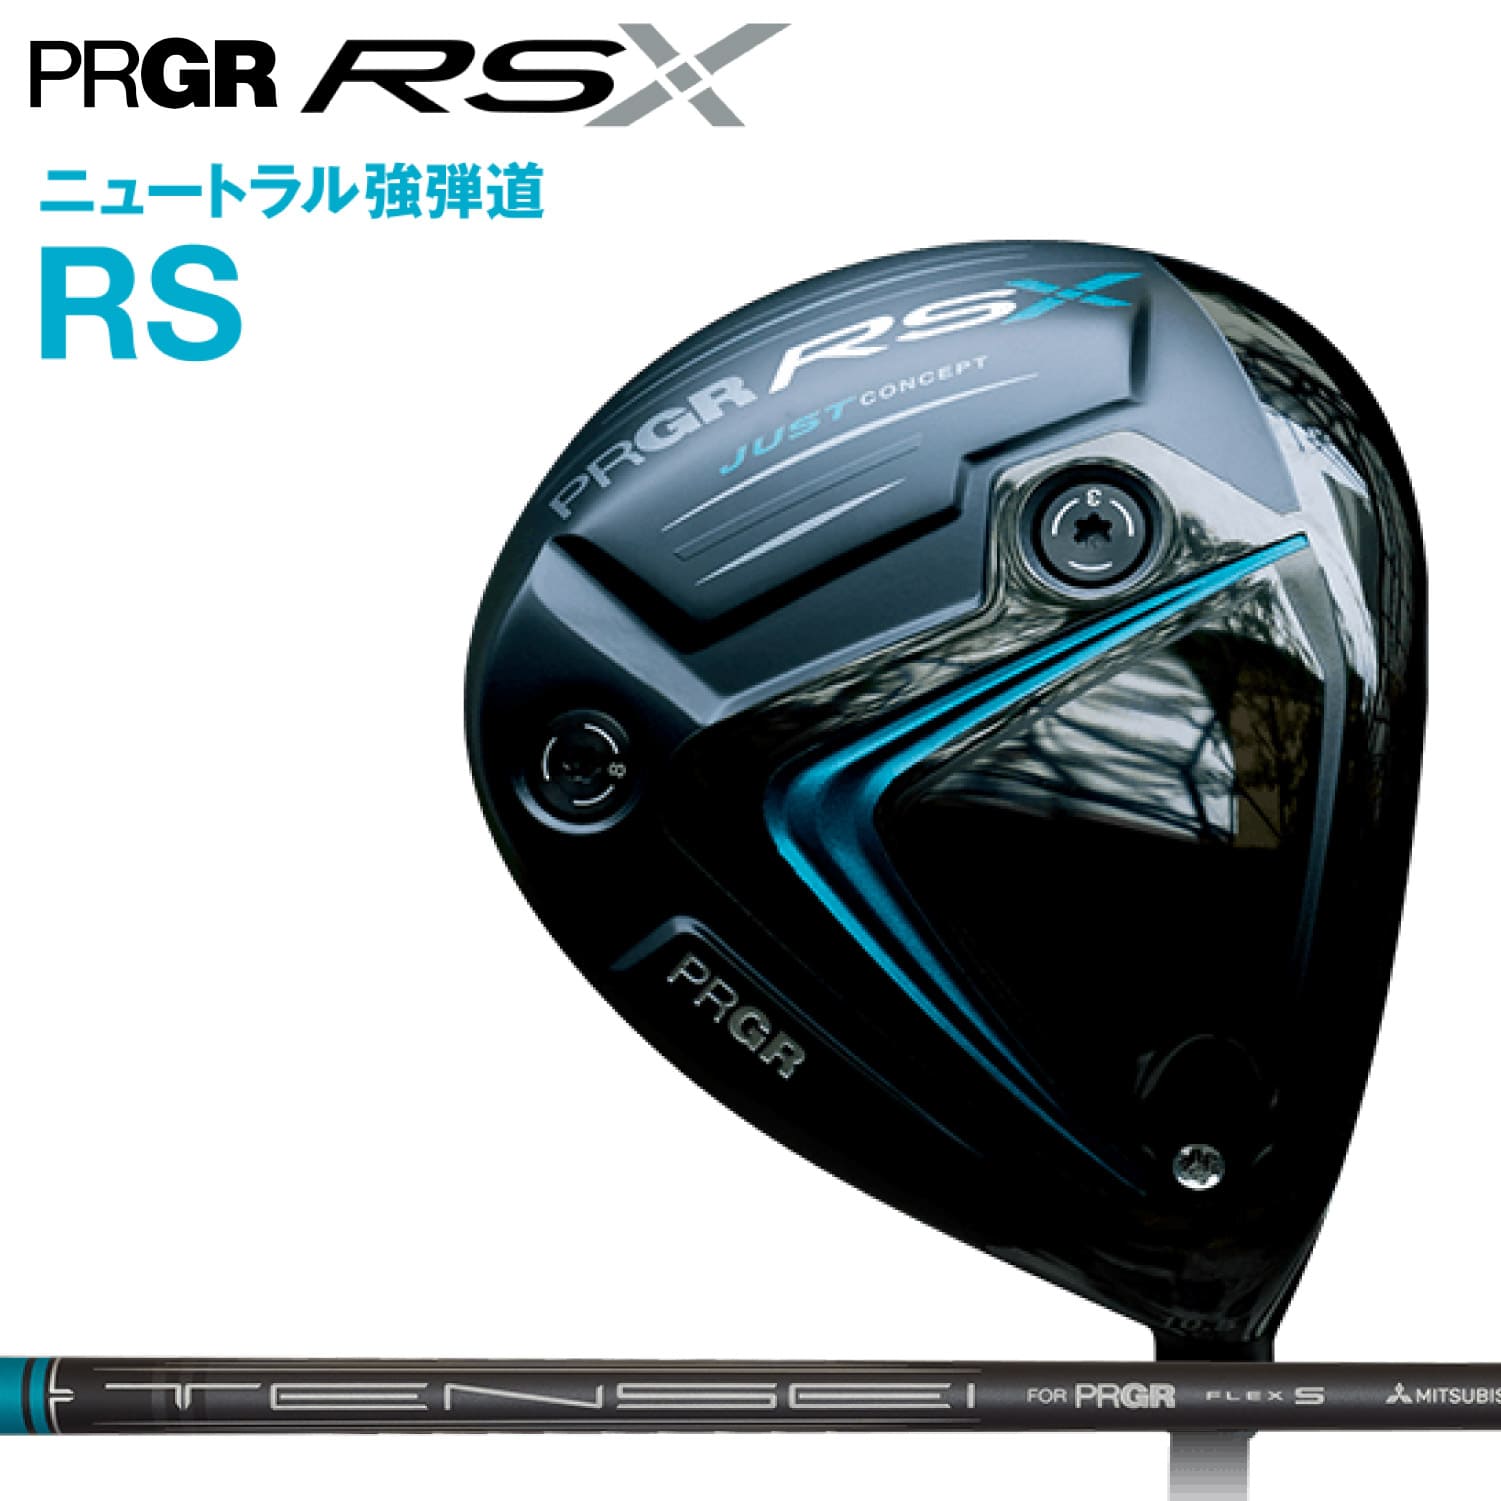 PRGR RS X DRIVER RS TENSEI FOR PRGR